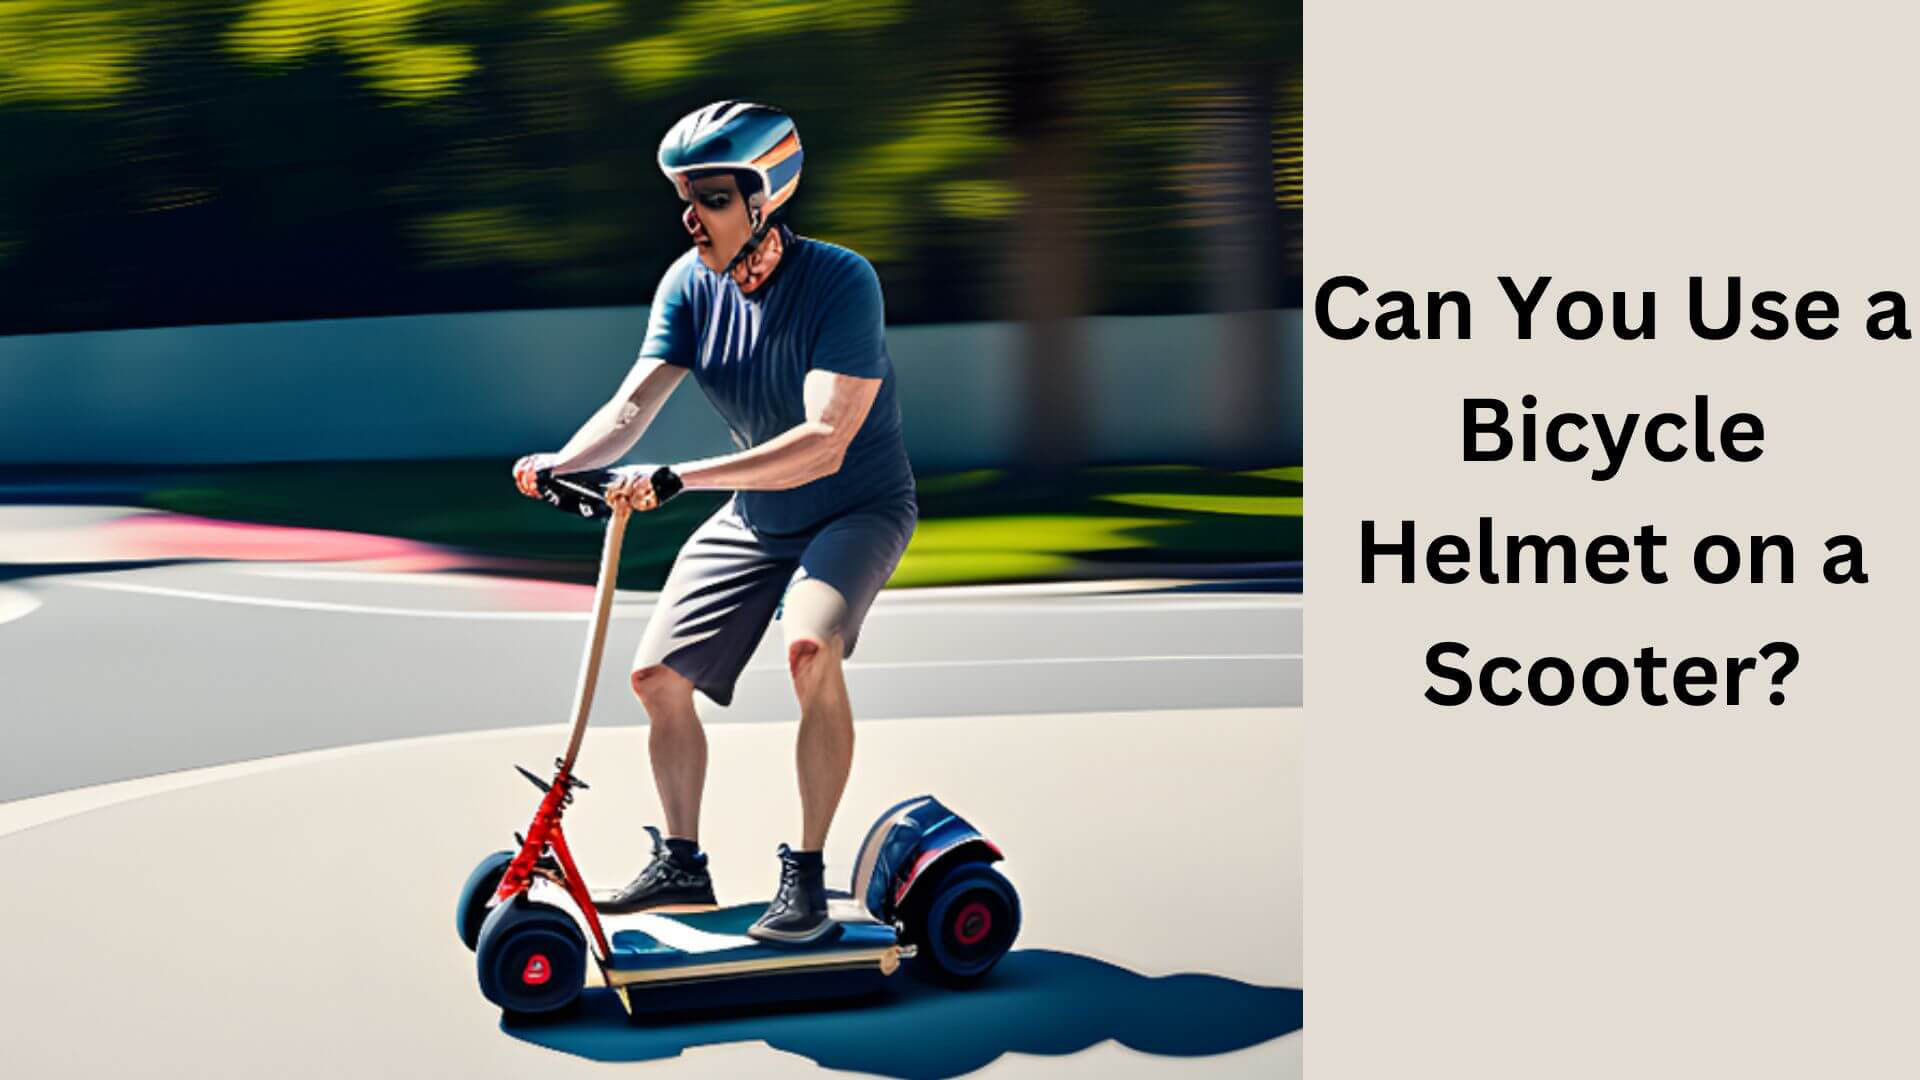 Can You Use a Bicycle Helmet on a Scooter?